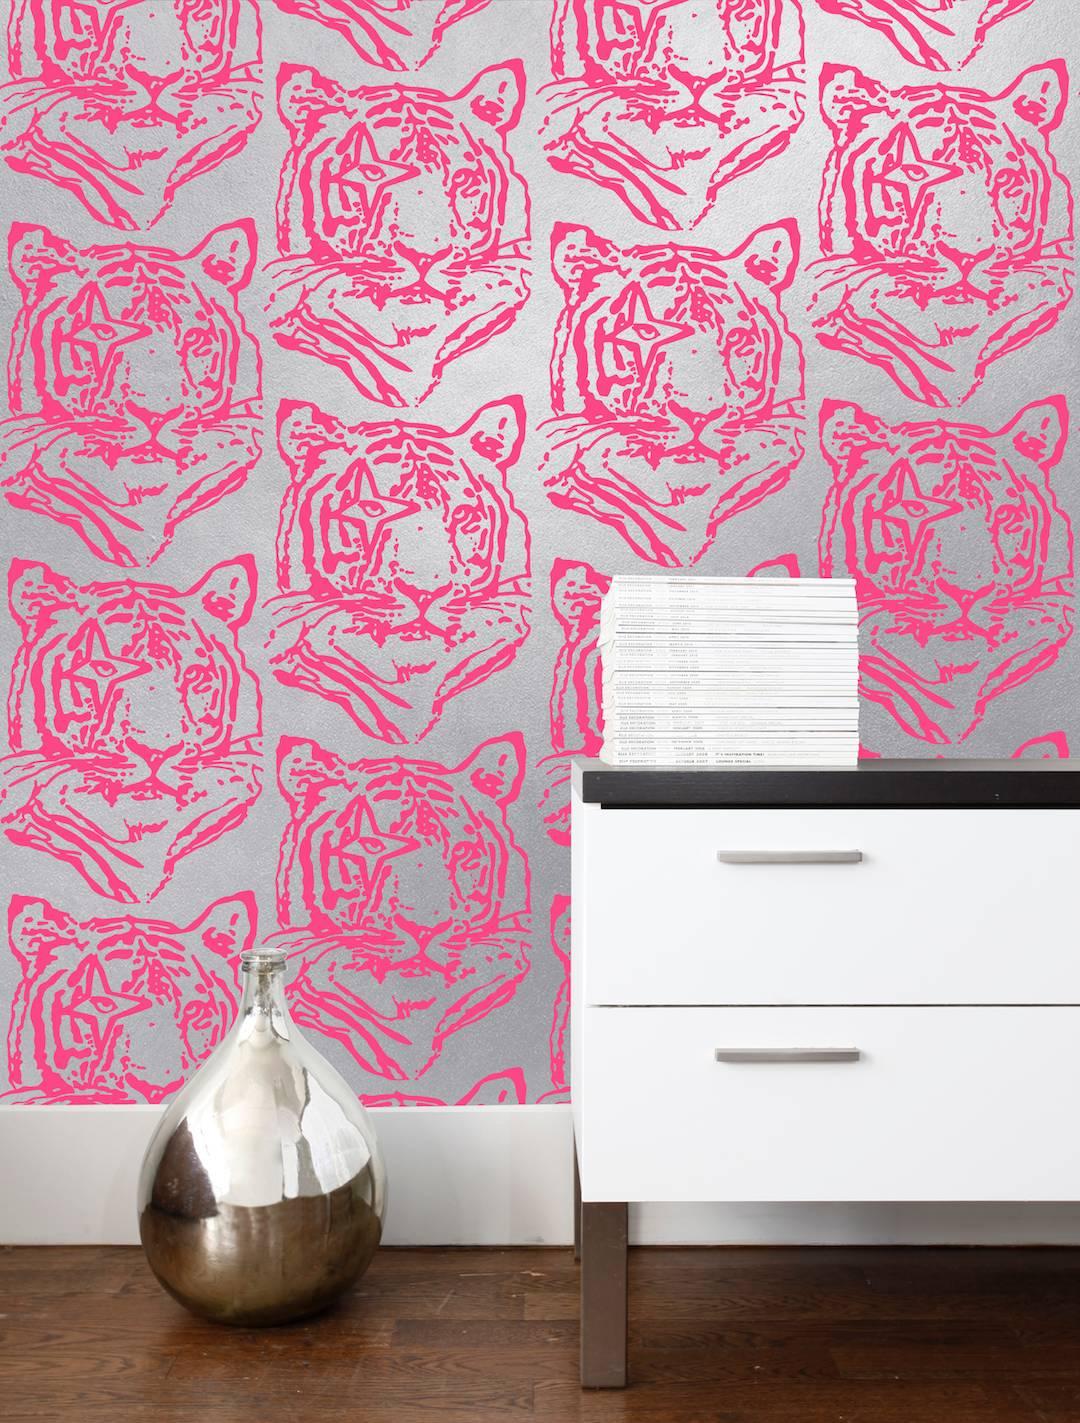 This beautiful star tiger wallpaper, a collaboration with Finnish designer Paola Suhonen of Ivana Helsinki, is the perfect décor for your home or business.
 
Samples are available for $18 including US shipping, please message us to purchase. 